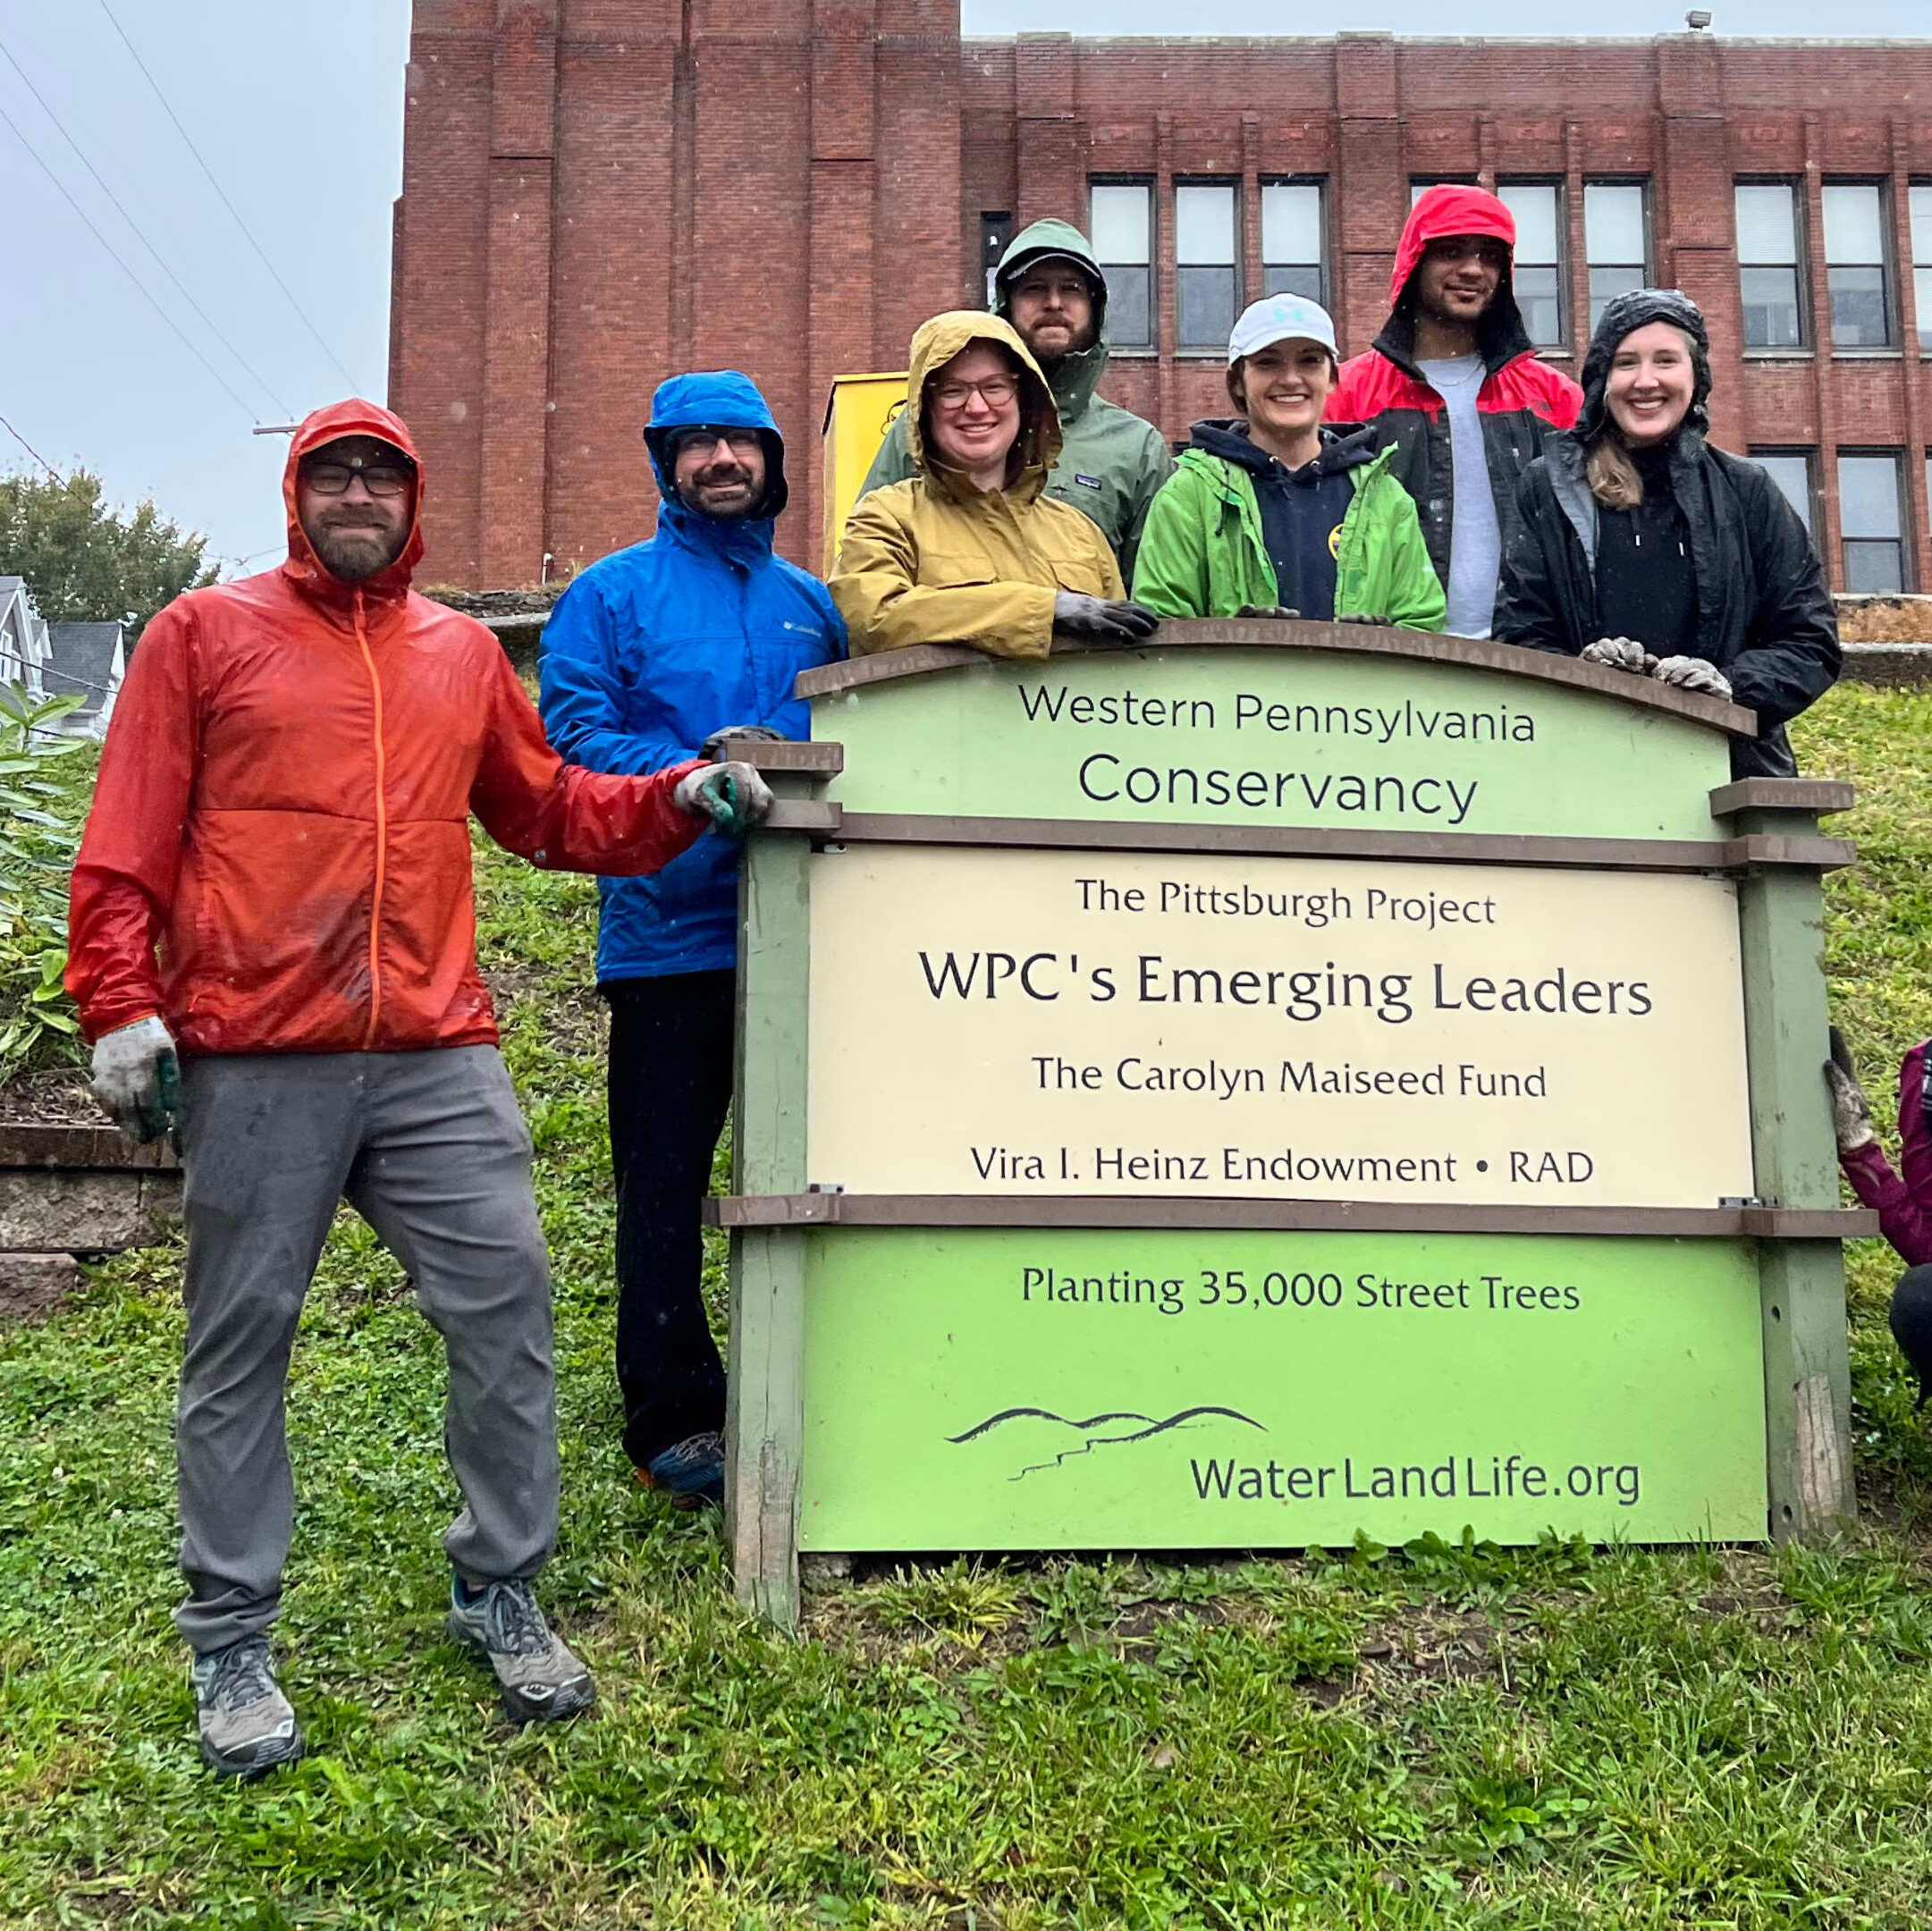 WPC Emerging Leaders pose with a garden sign during a garden pull-out event in the Fall of 2022.